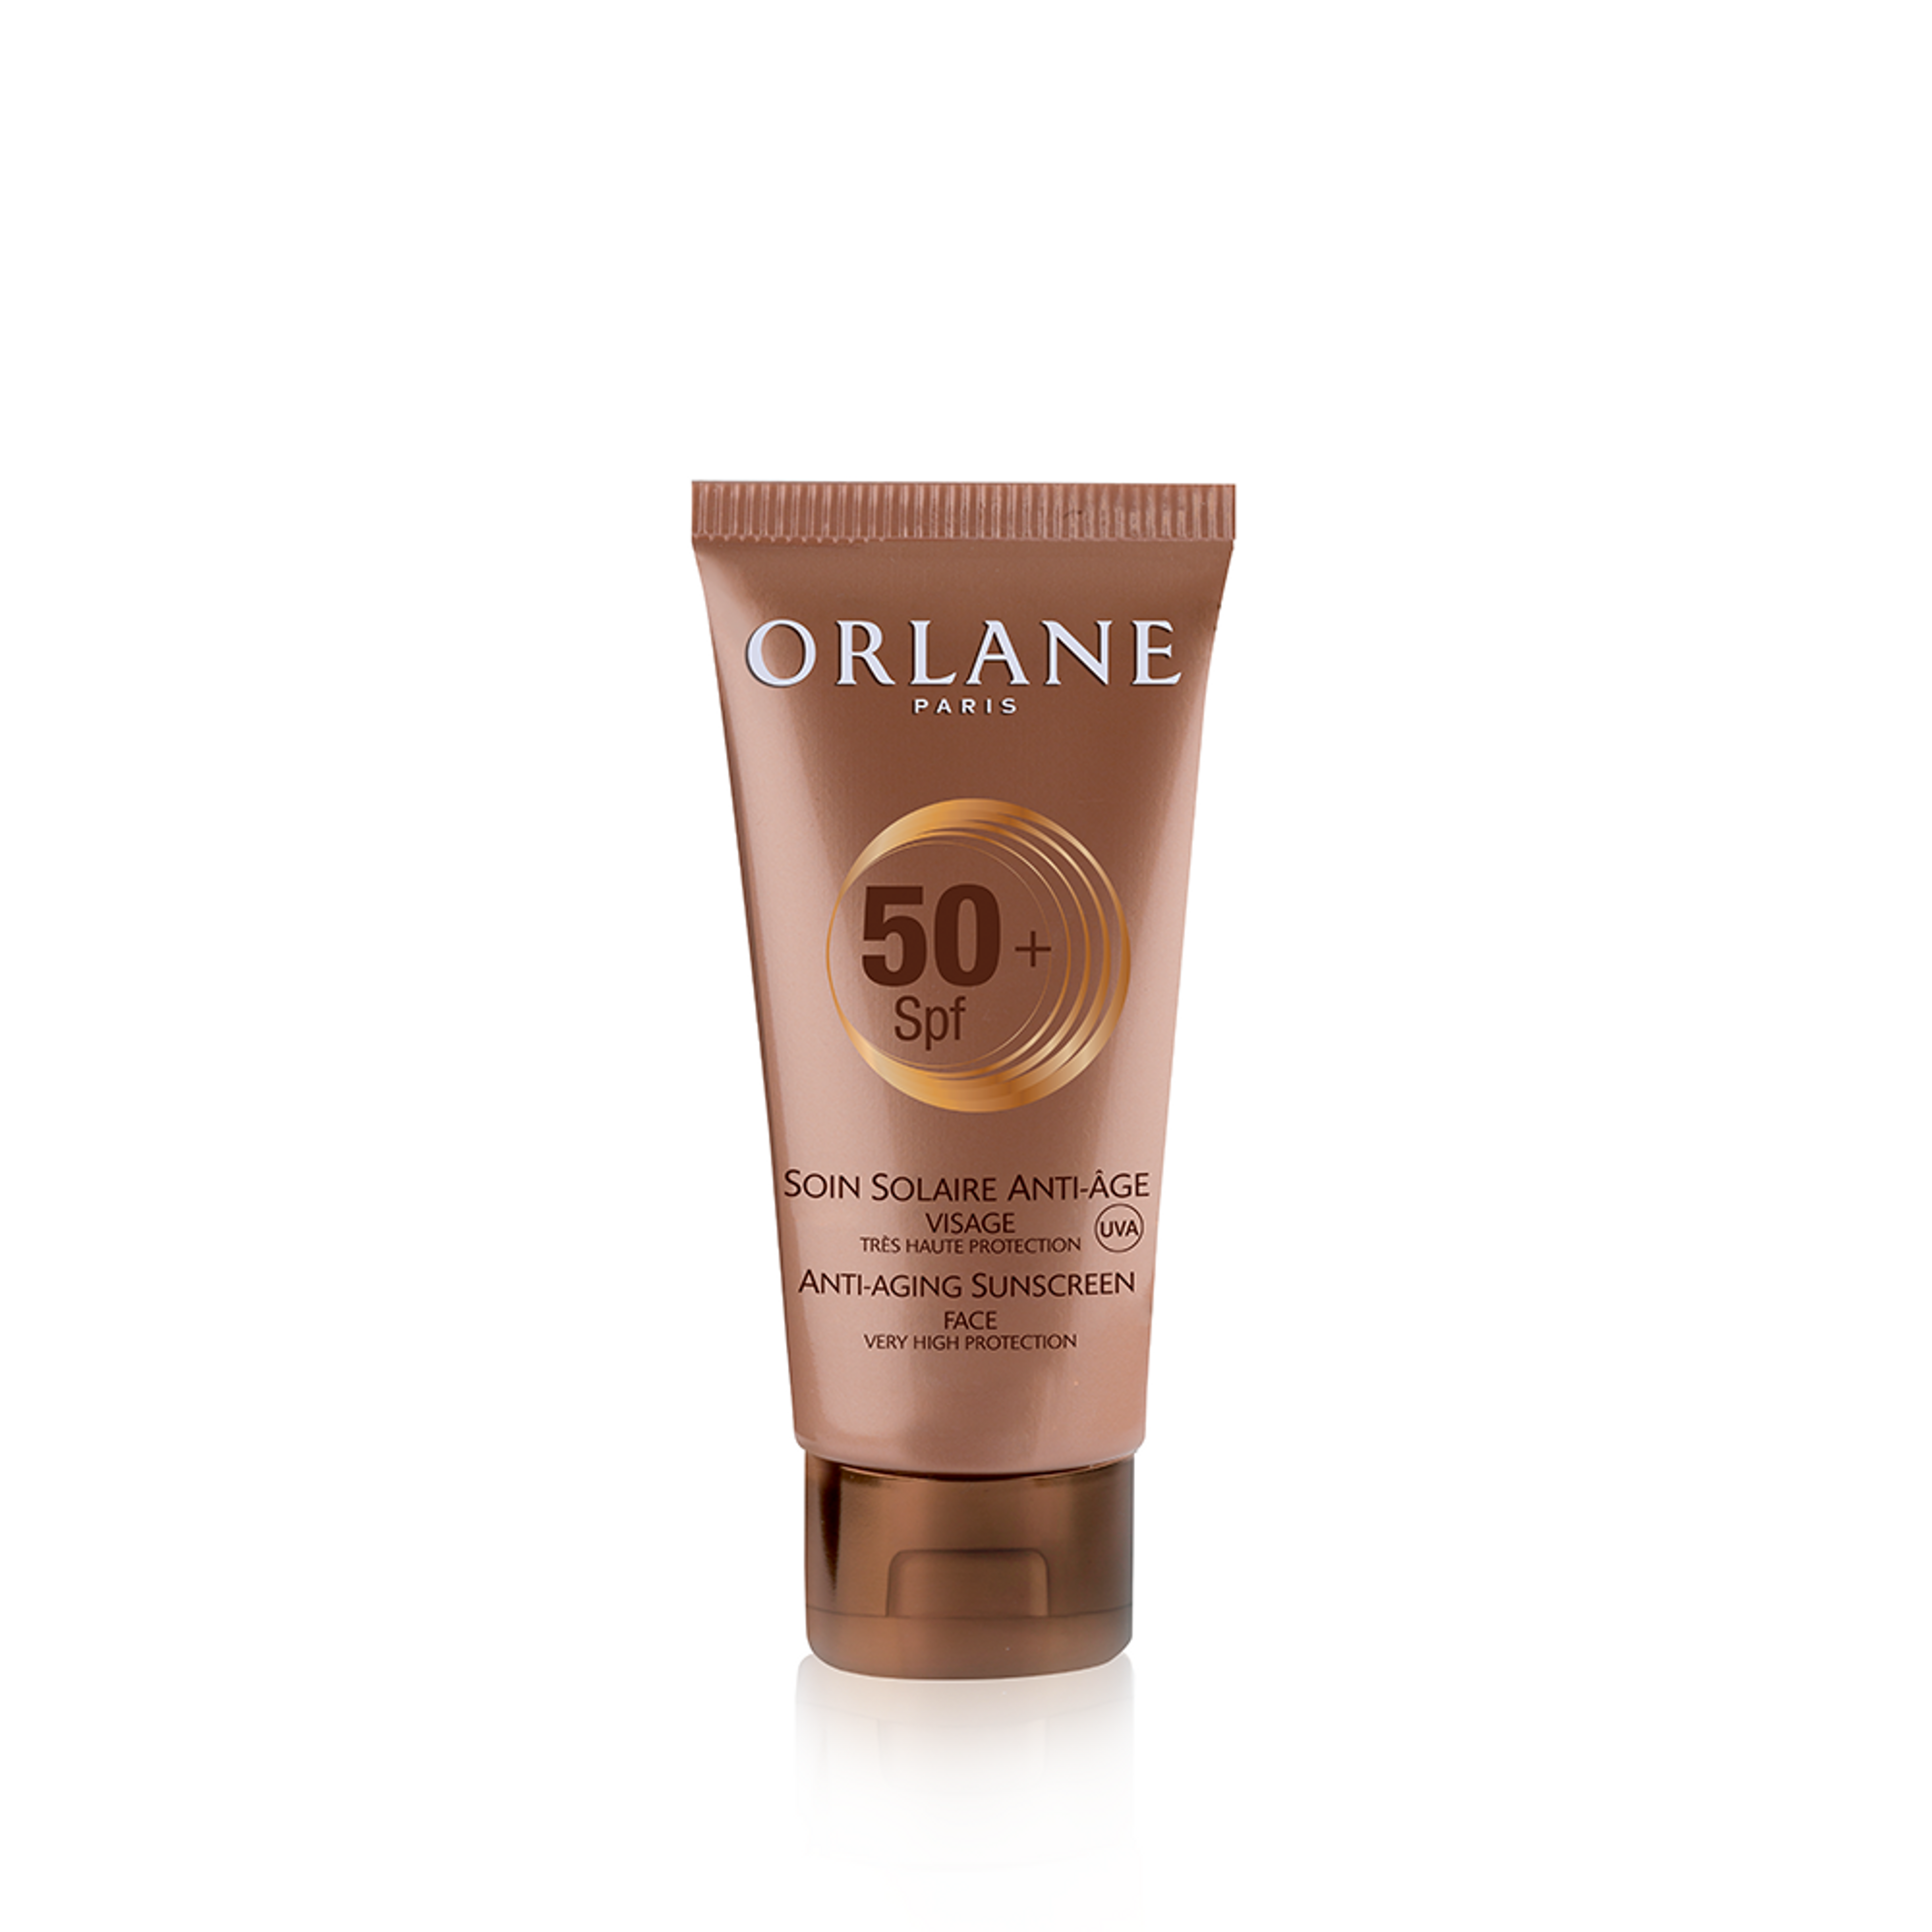 Orlane Soin Solaires Anti-age Visage Spf 50 1